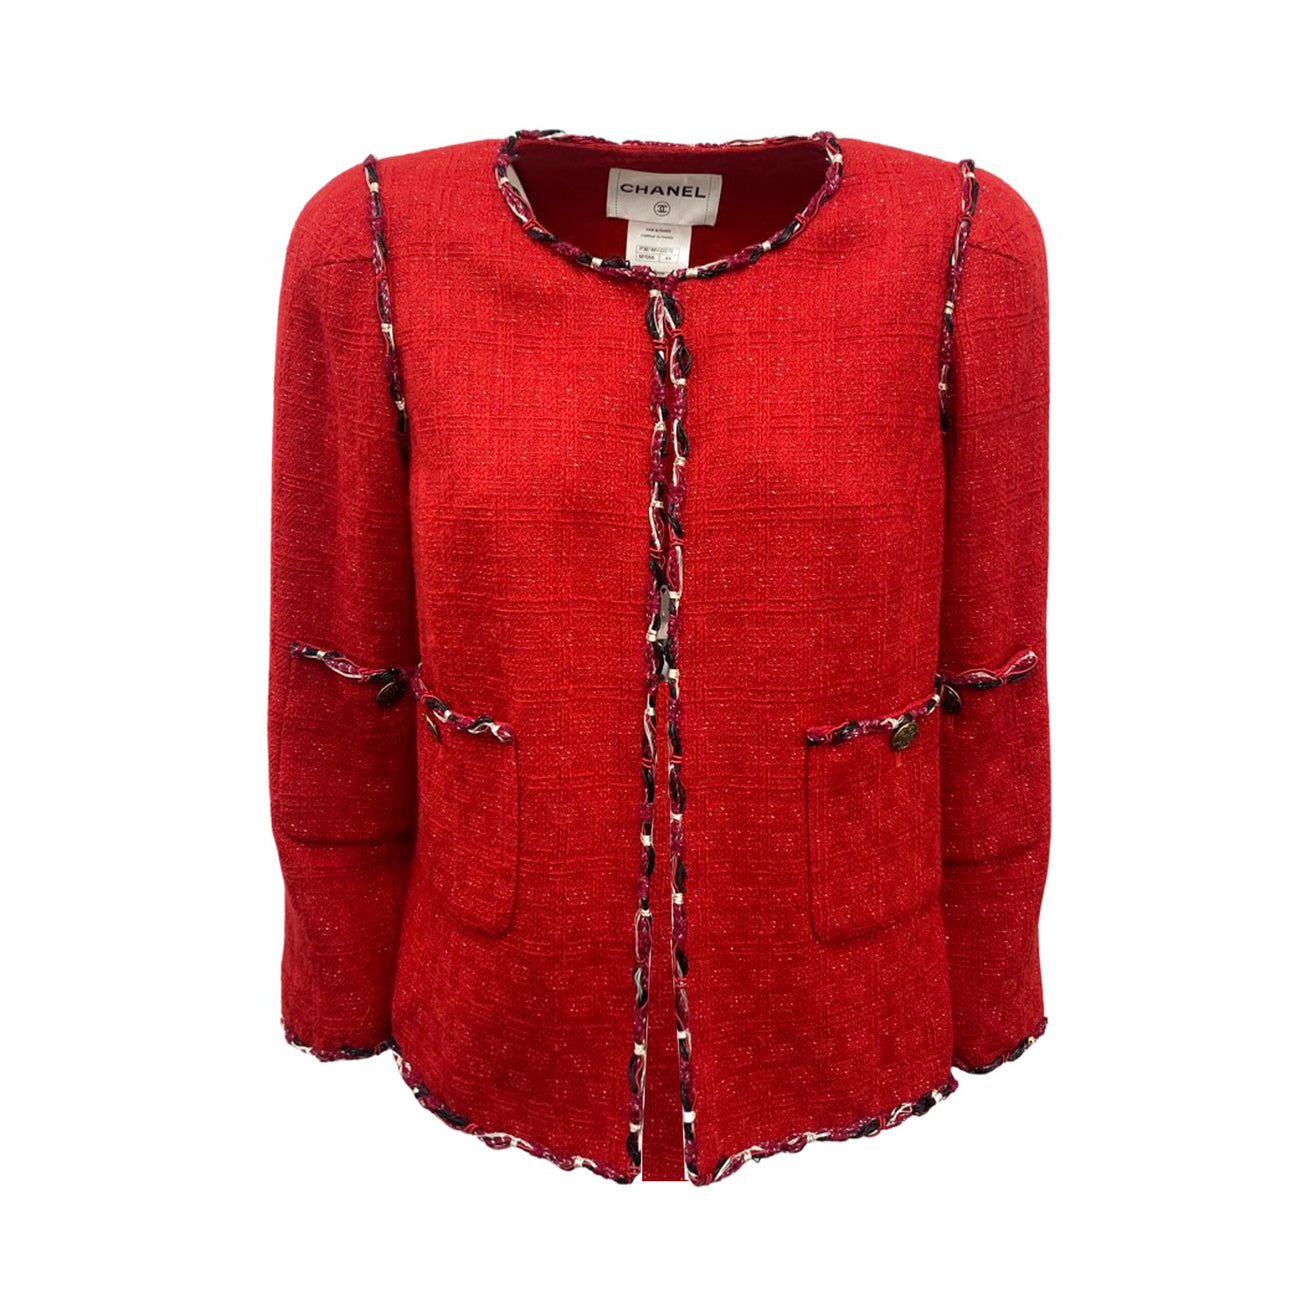 WHITE WOOLBLEND TWEED WITH BLUE AND RED PIPING TRIM JACKET CHANEL  A  Collection of a Lifetime Chanel Online  Jewellery  Sothebys